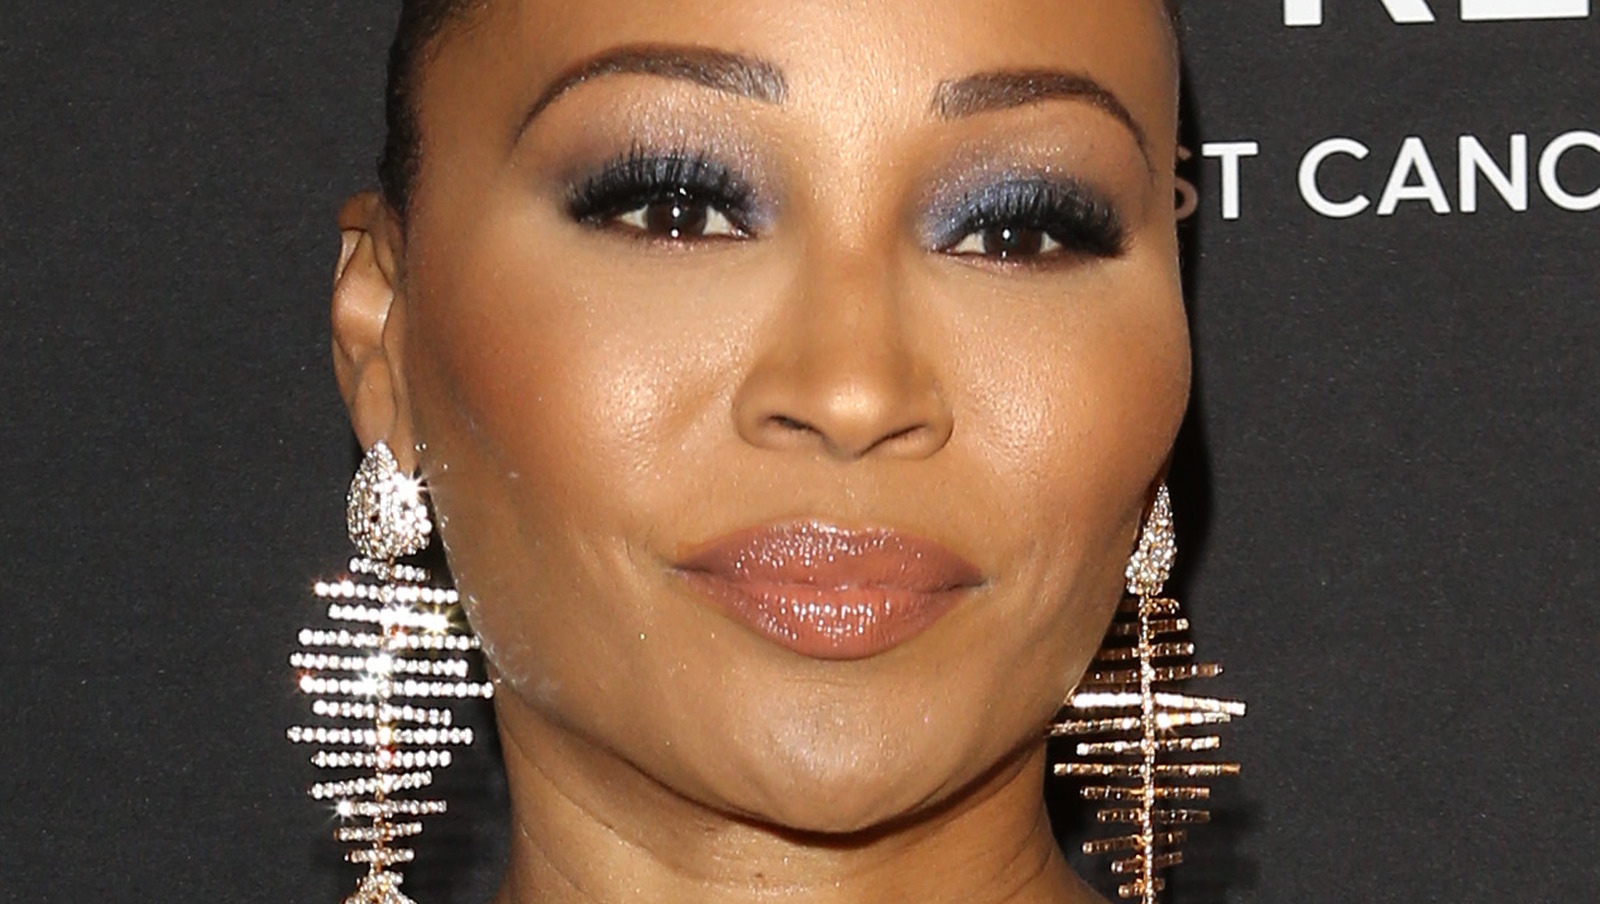 What Was Cynthia Bailey Obsessed With Asking Teresa Giudice About?